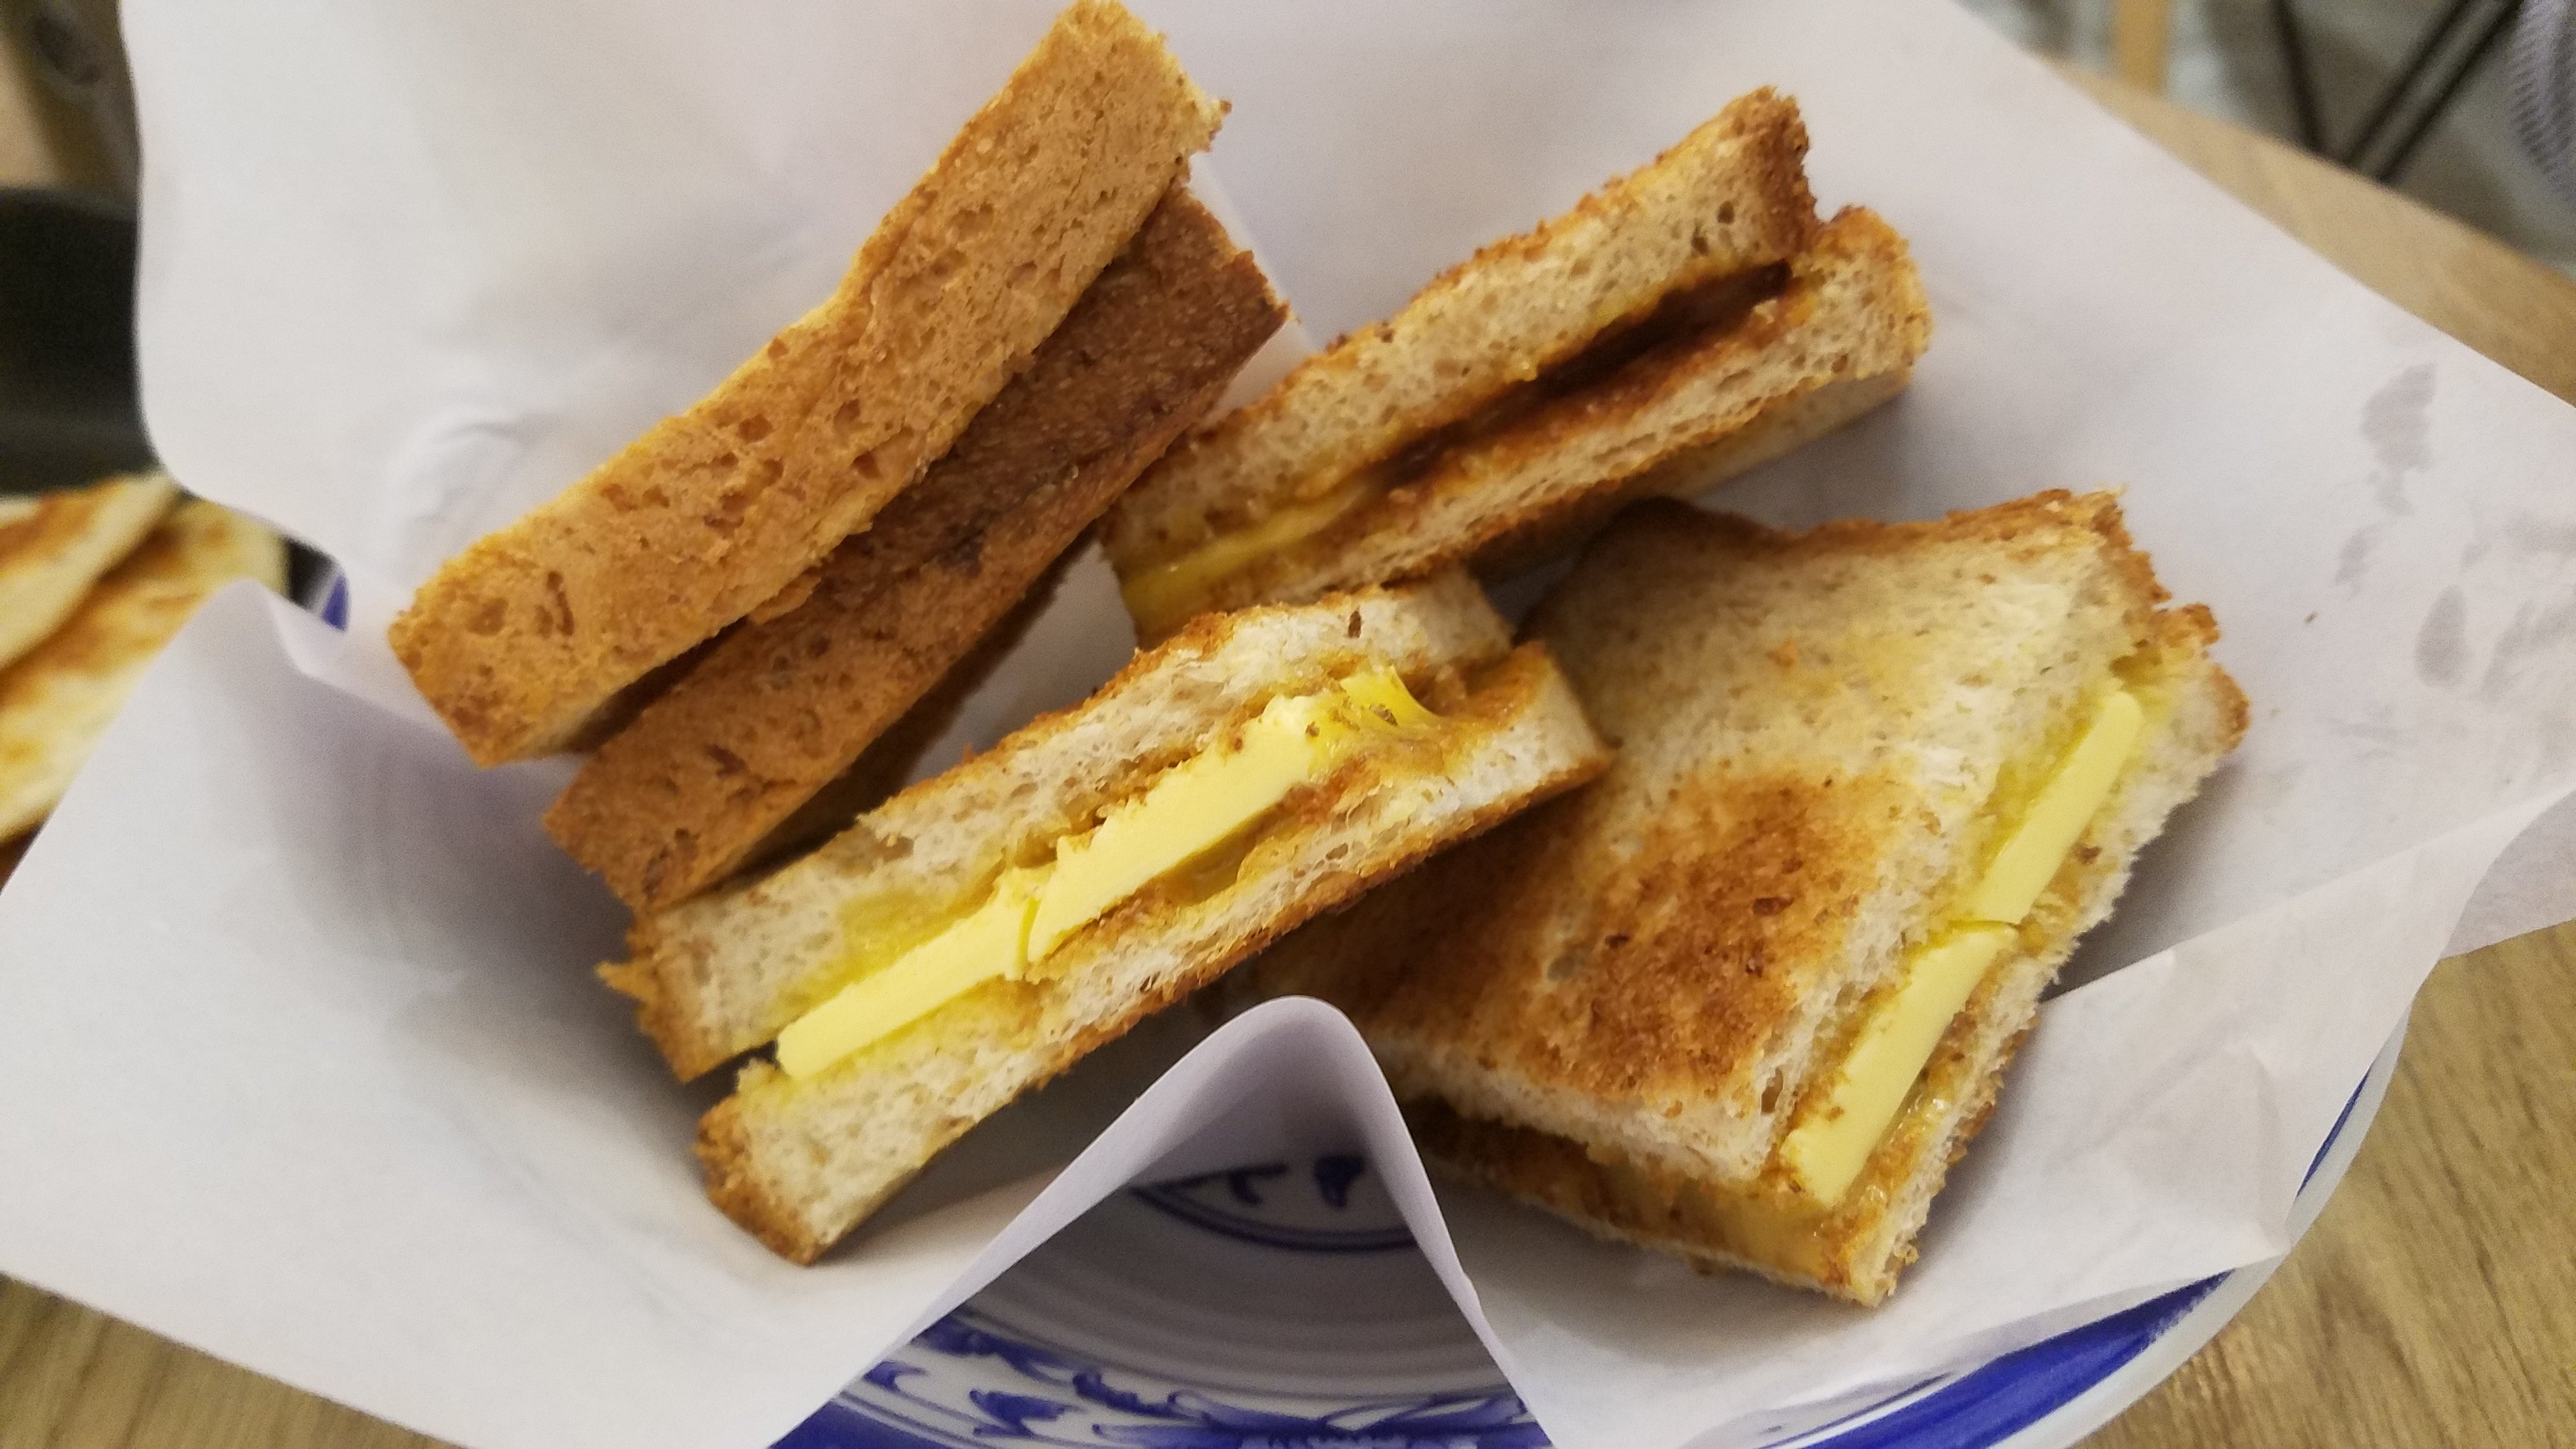 Kaya toast was ranked among the top sandwiches in the world, according to FoodAtlas. Photo: SCMP